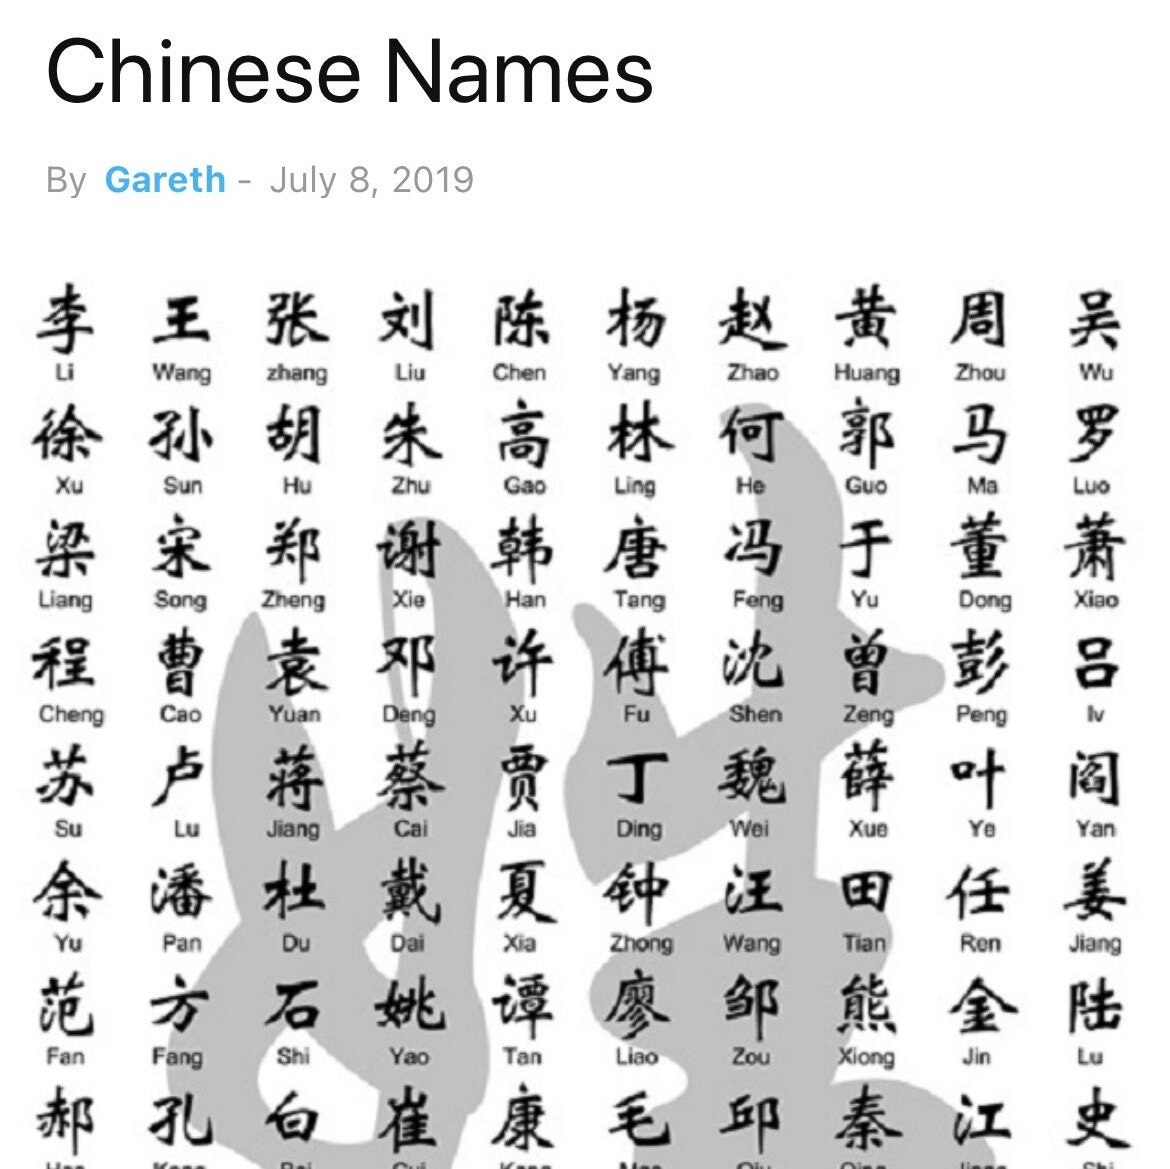 Ding Name Meaning